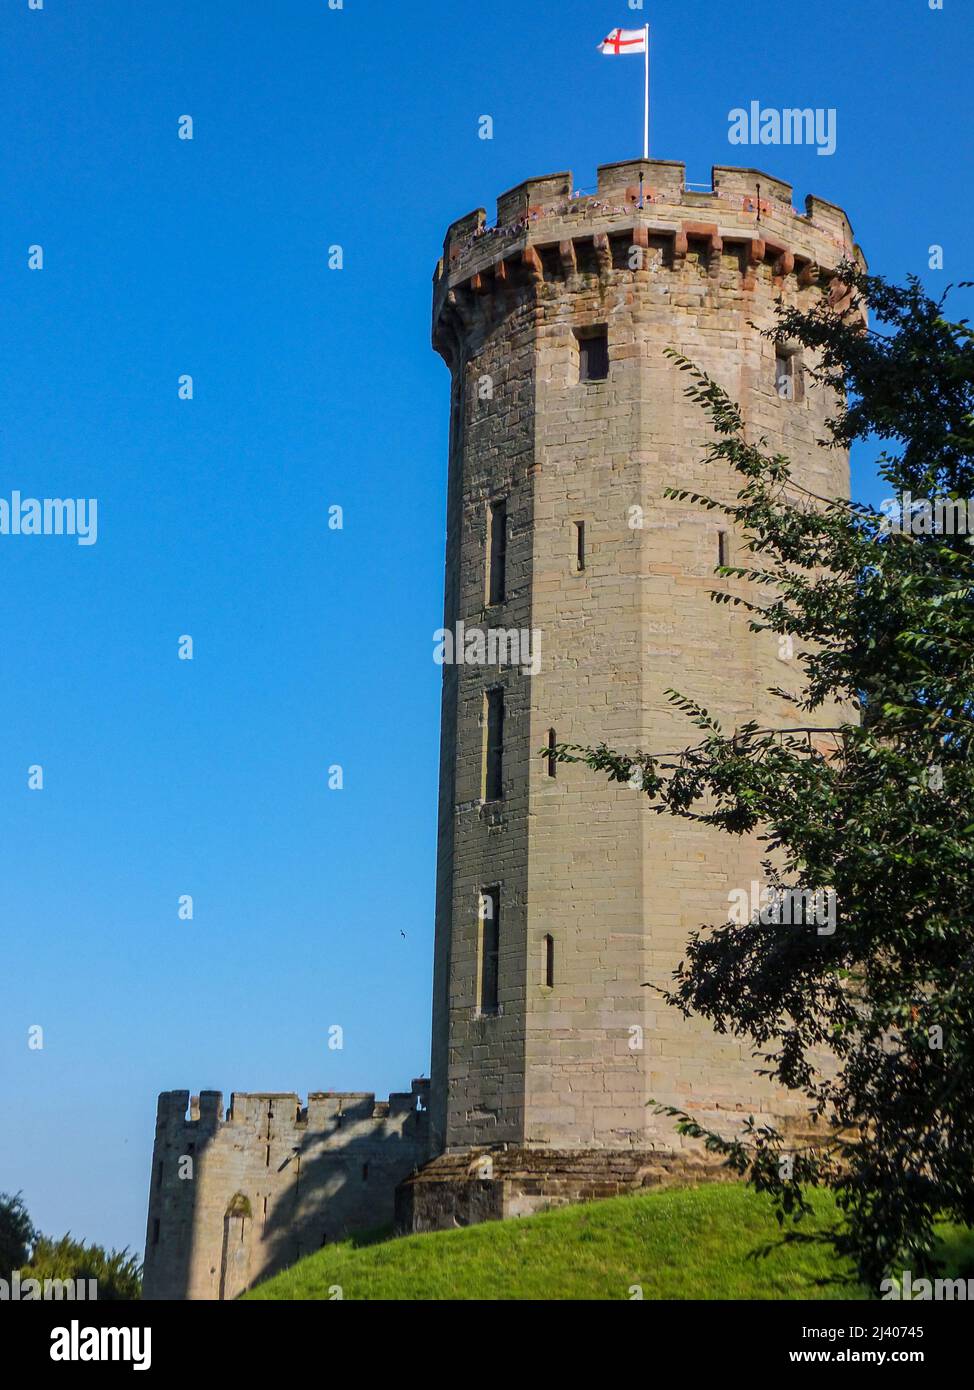 The English flag flies in the blue sky over the castellated Guy's Tower at medieval Warwick Castle in Warwickshire, England, UK. Stock Photo